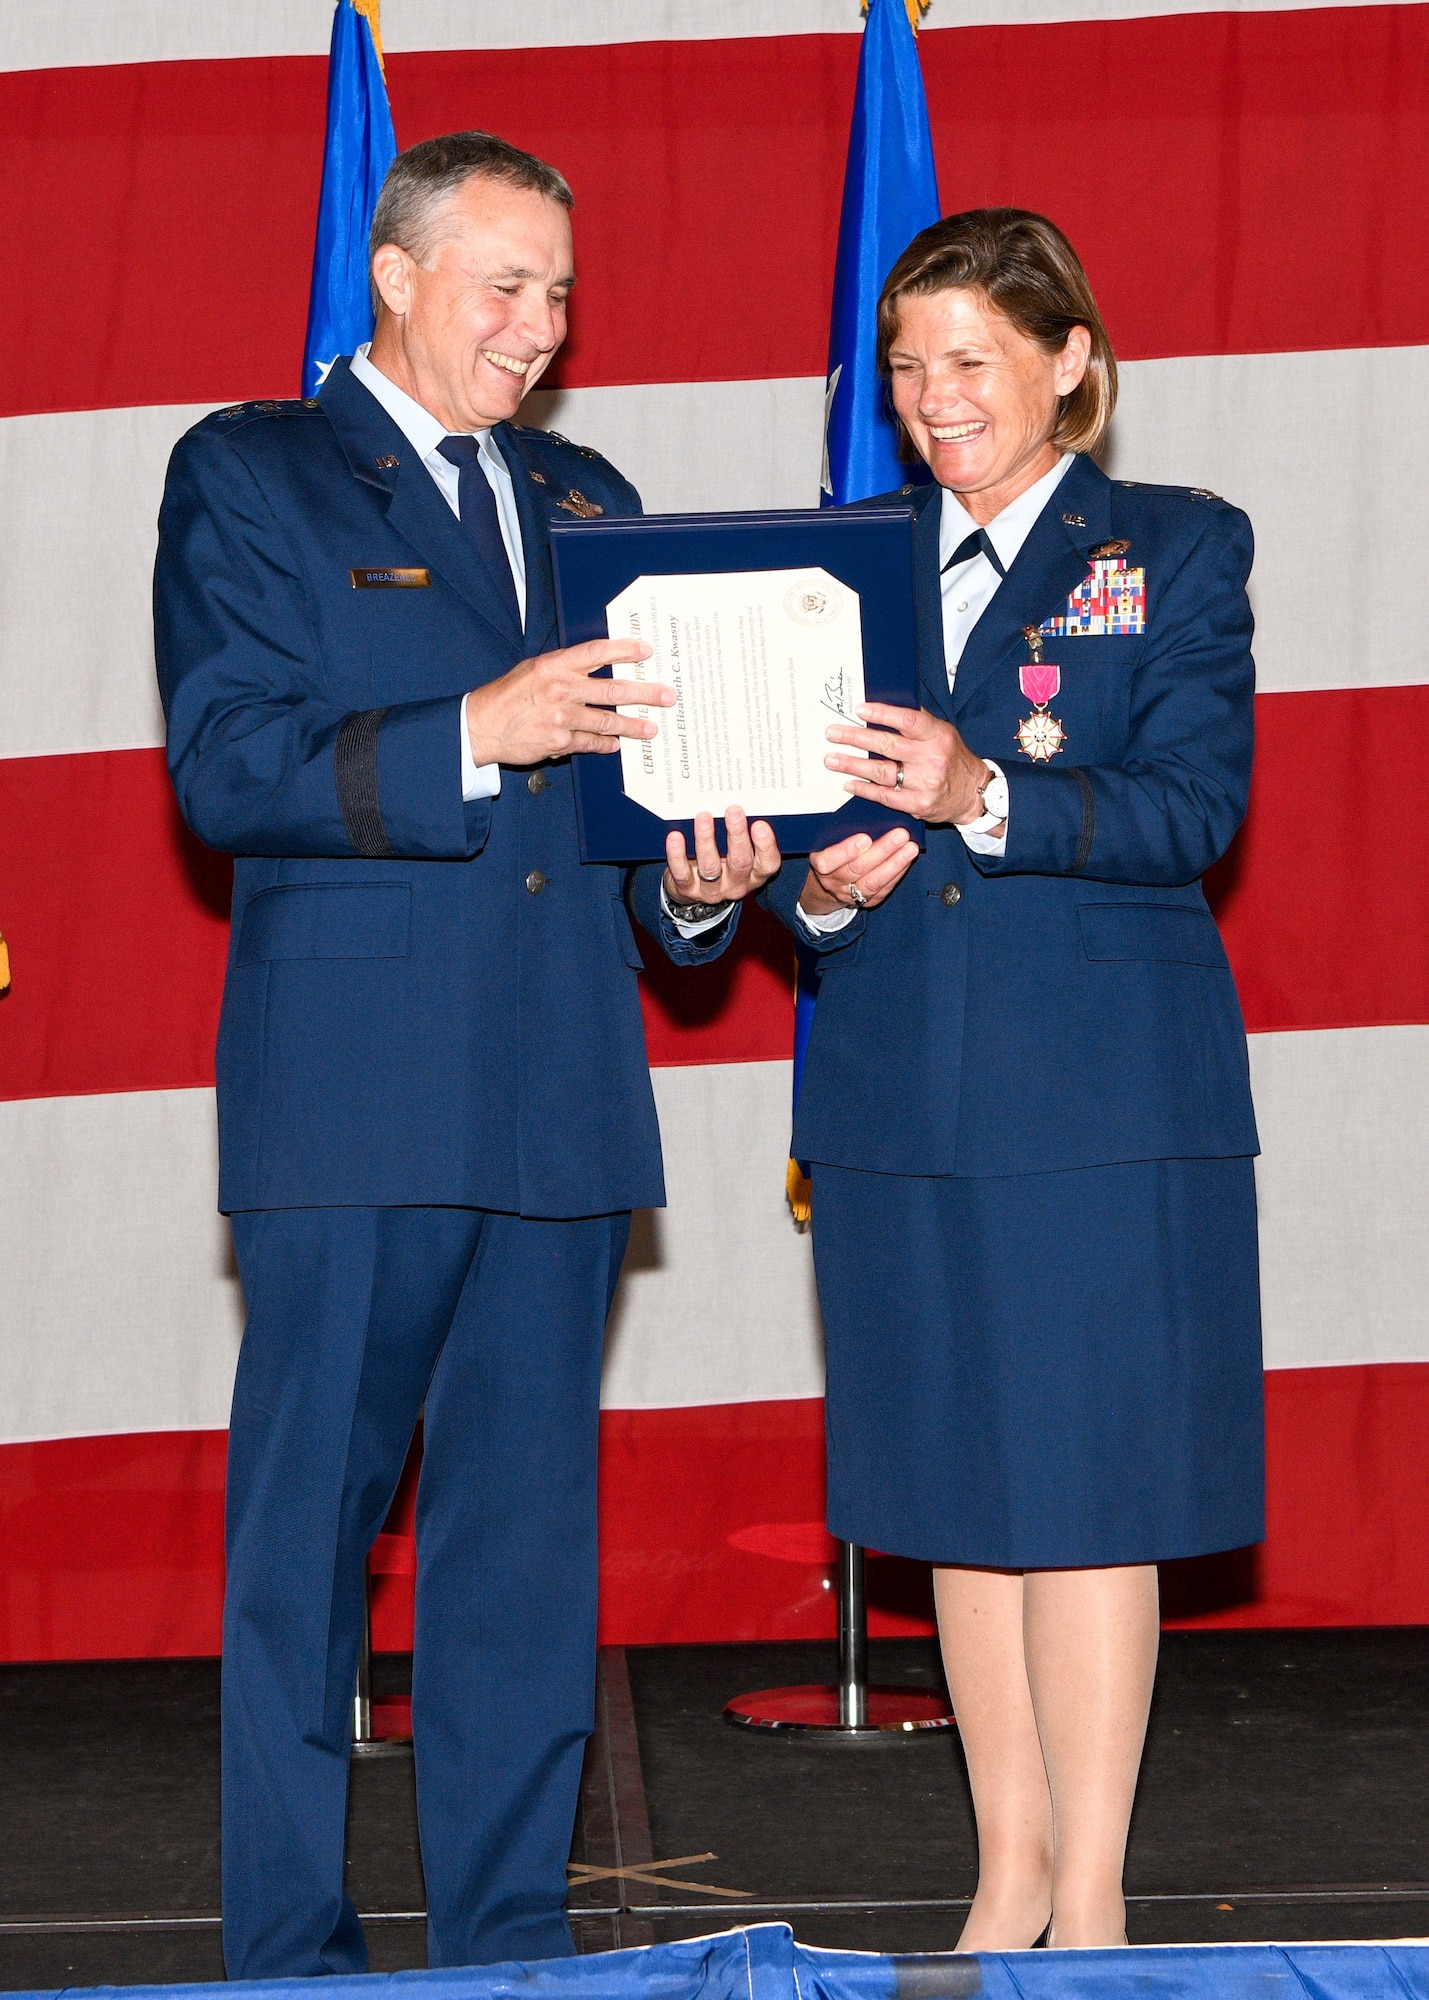 Colonel Elizabeth "Beth" Kwasny accepts a Certificate of Retirement from Major General John Breazeale during a retirement ceremony on Saturday, April 30, 2022. Kwasny served 31 years in the United States Air Force, both on Active Duty and as a traditional reservist.